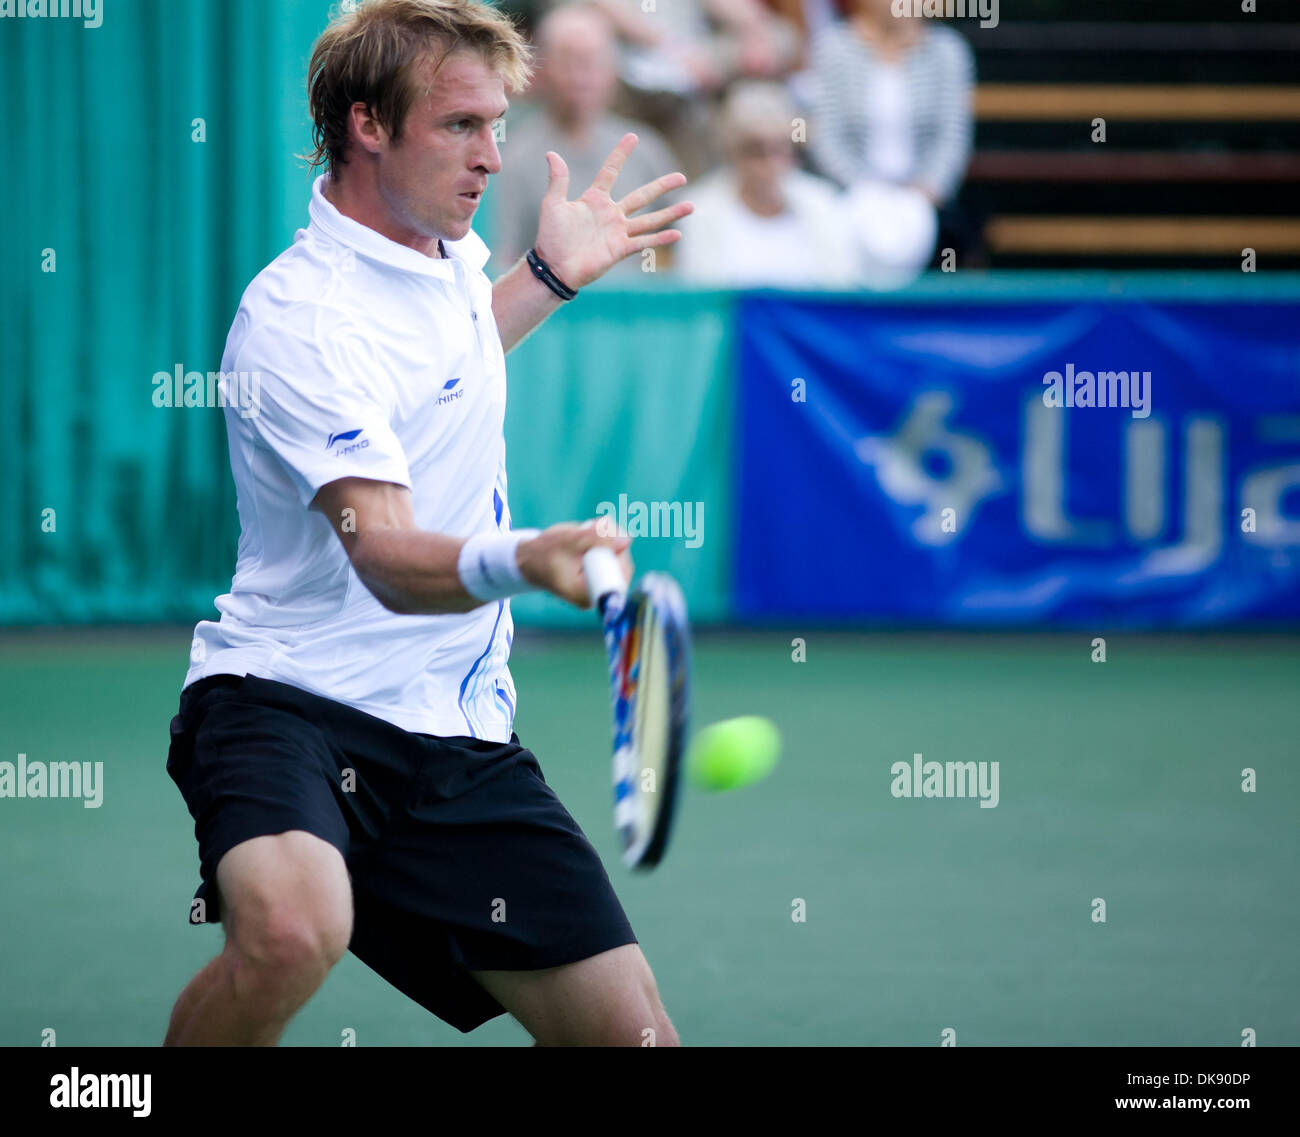 Aug. 05, 2011 - Vancouver, British Columbia, Canada - GREGA ZEMELJA of Slovenia returns a volley against R. Ginepri during their  men's singles quarterfinals match at the Odlum Brown Vancouver Open held at the Hollyburn Country Club. (Credit Image: © David Bukach/ZUMAPRESS.com) Stock Photo